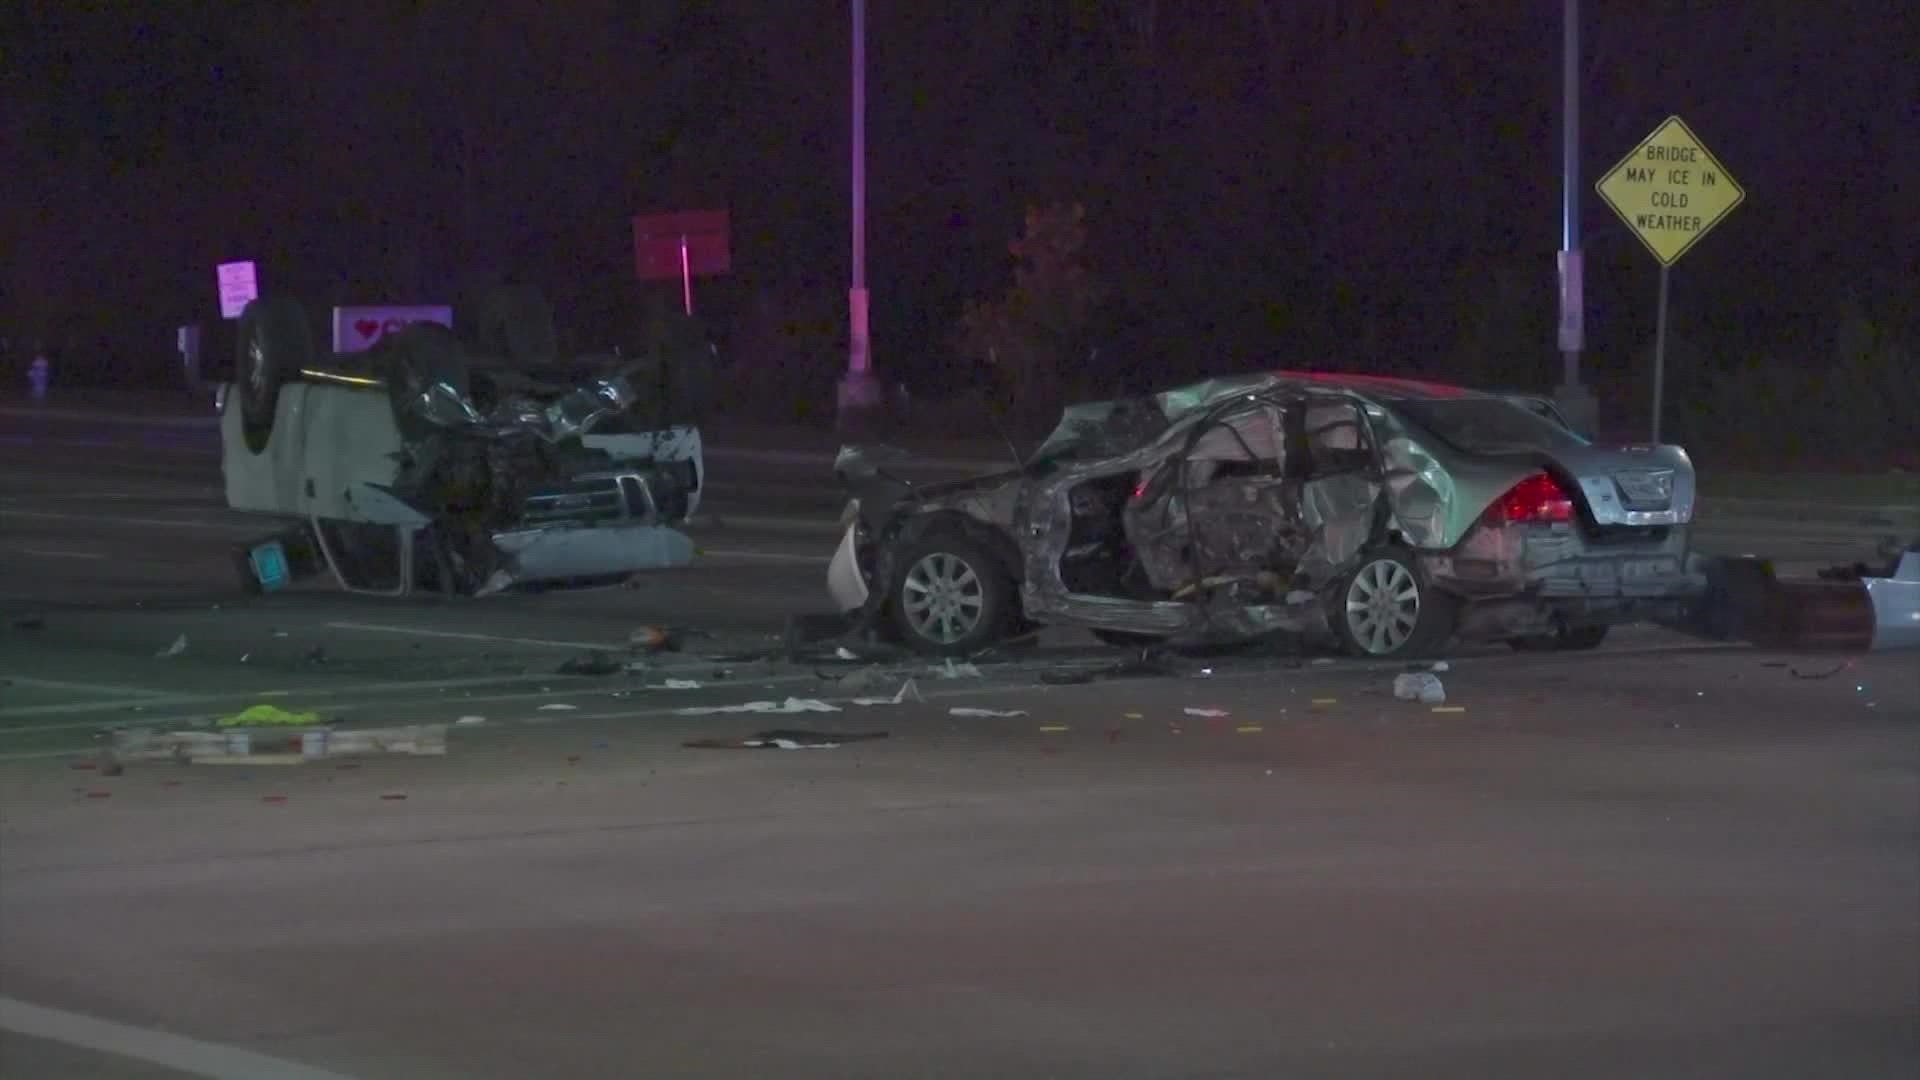 Houston traffic: 3 separate deadly crashes reported overnight | khou.com